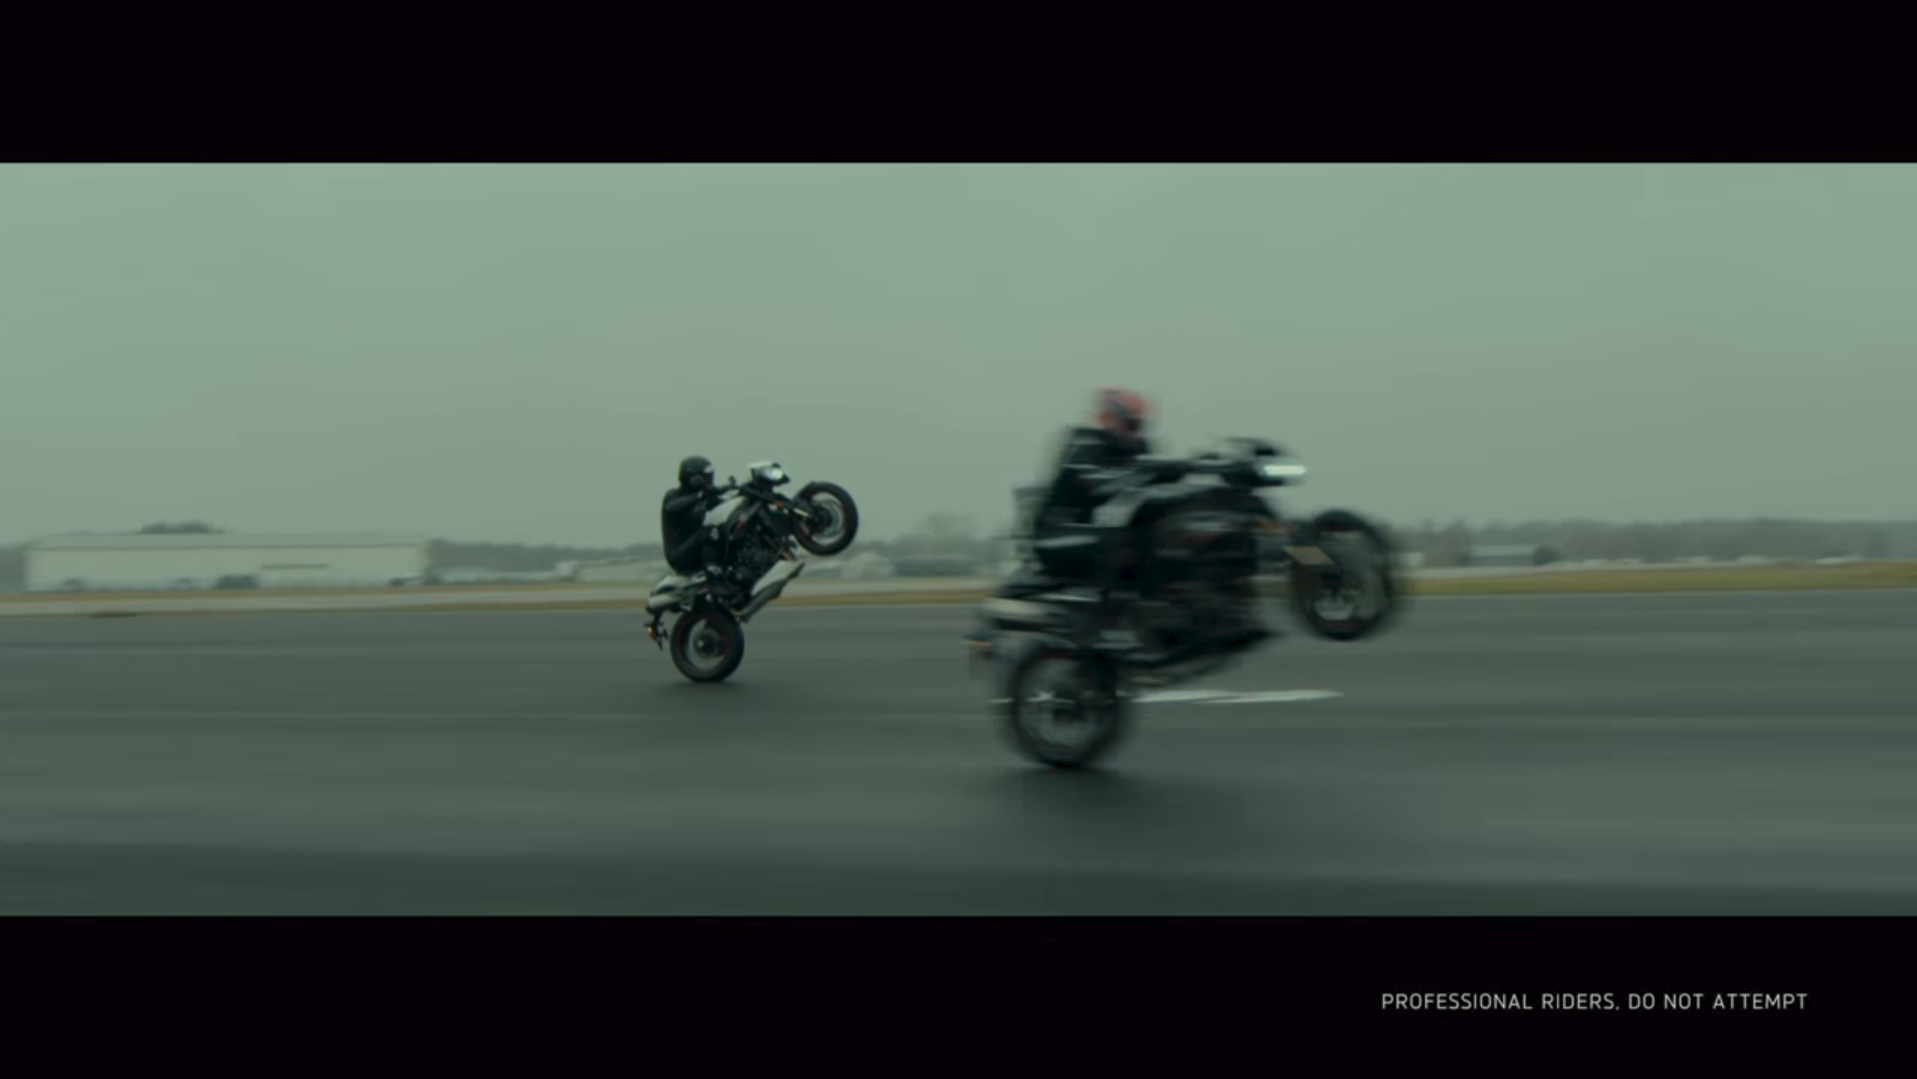 Watch Two Racers Duke it Out on the New Triumph Speed Triple